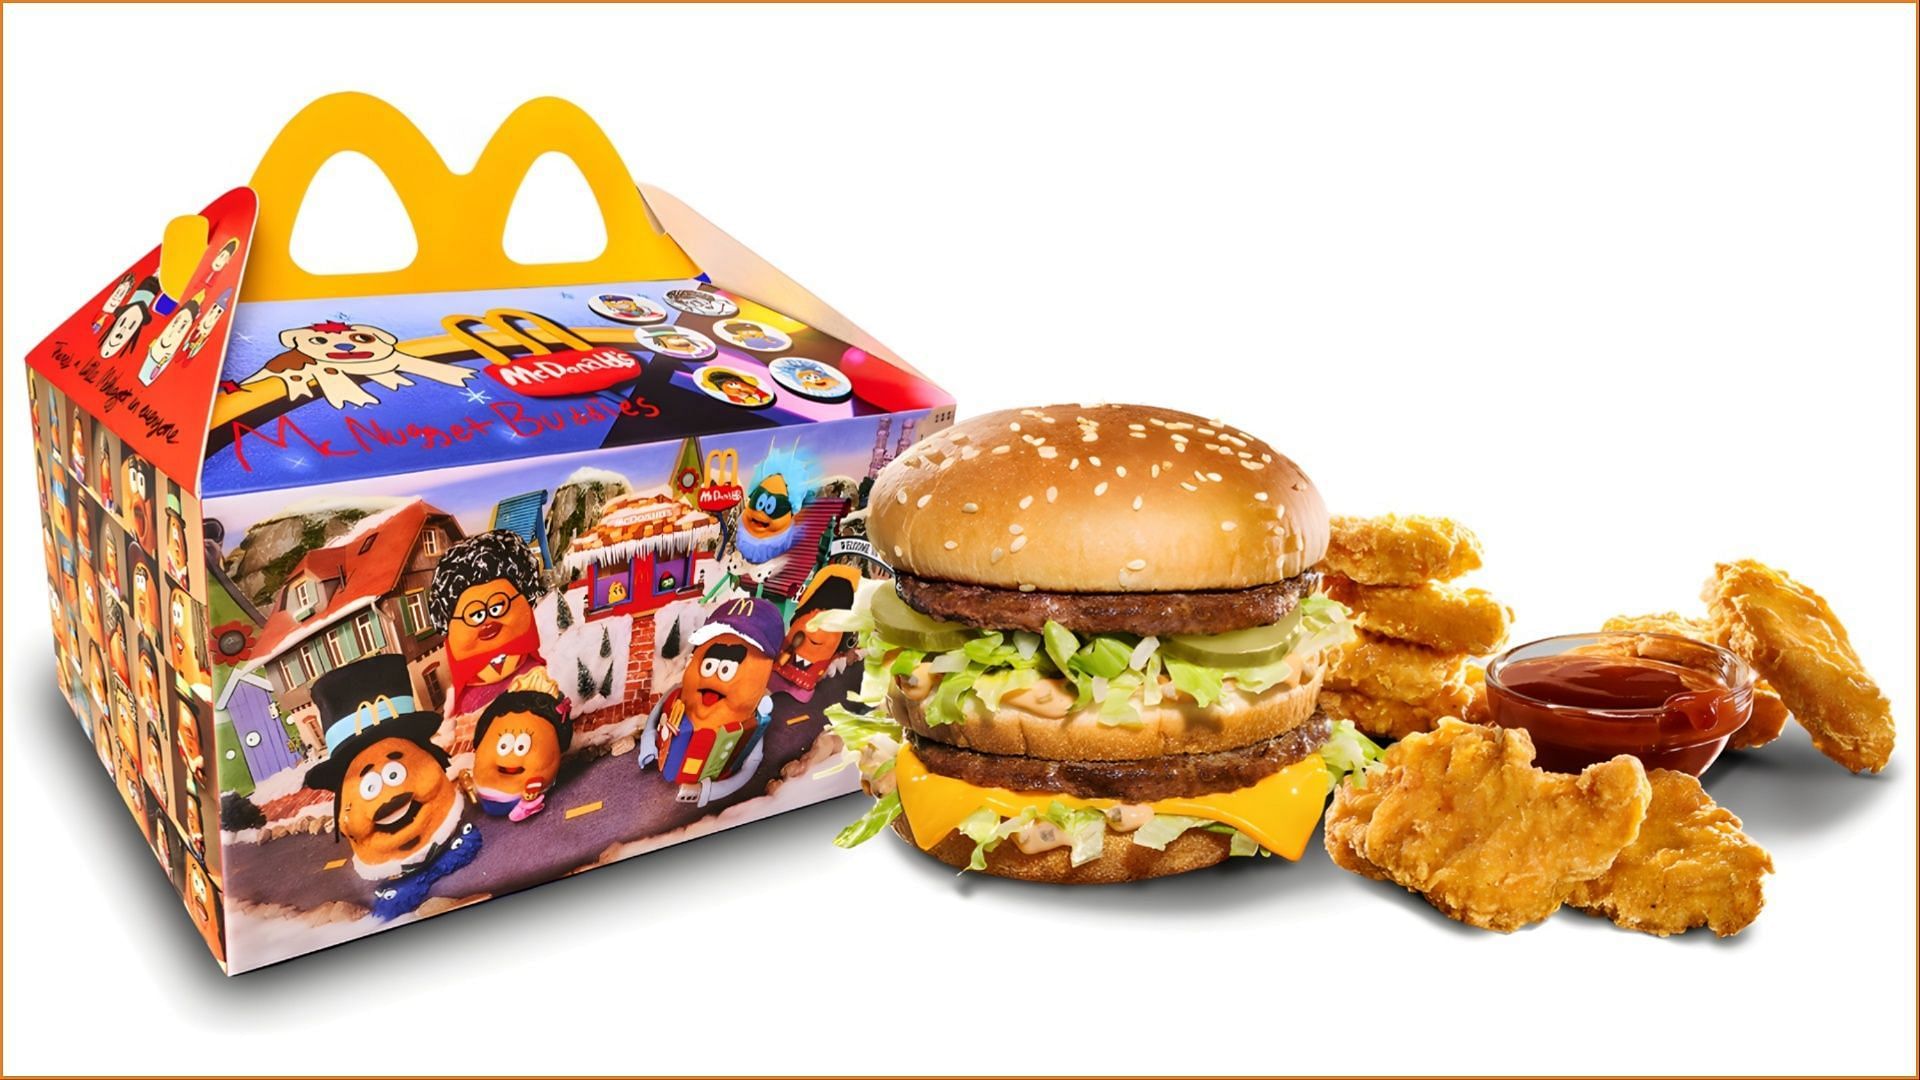 The limited-time Kerwin Frost Meal Boxes will allow adult fans to relive their childhood days (Image via Pinterest / McDonalds)